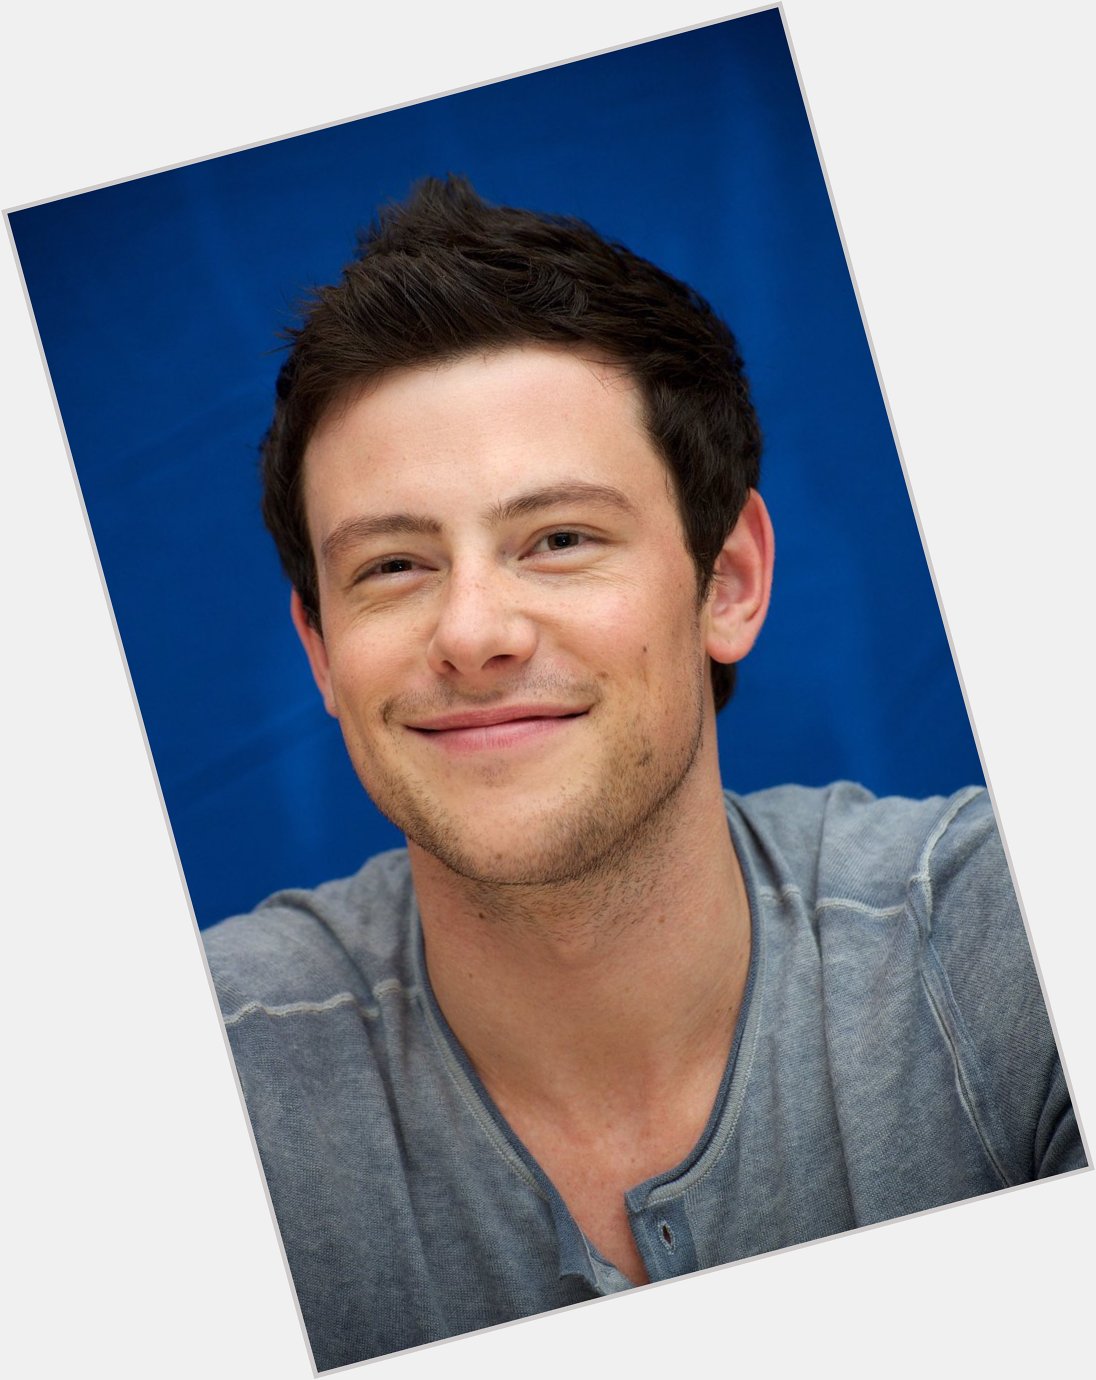 Cory Monteith Happy birthday 
Miss you  